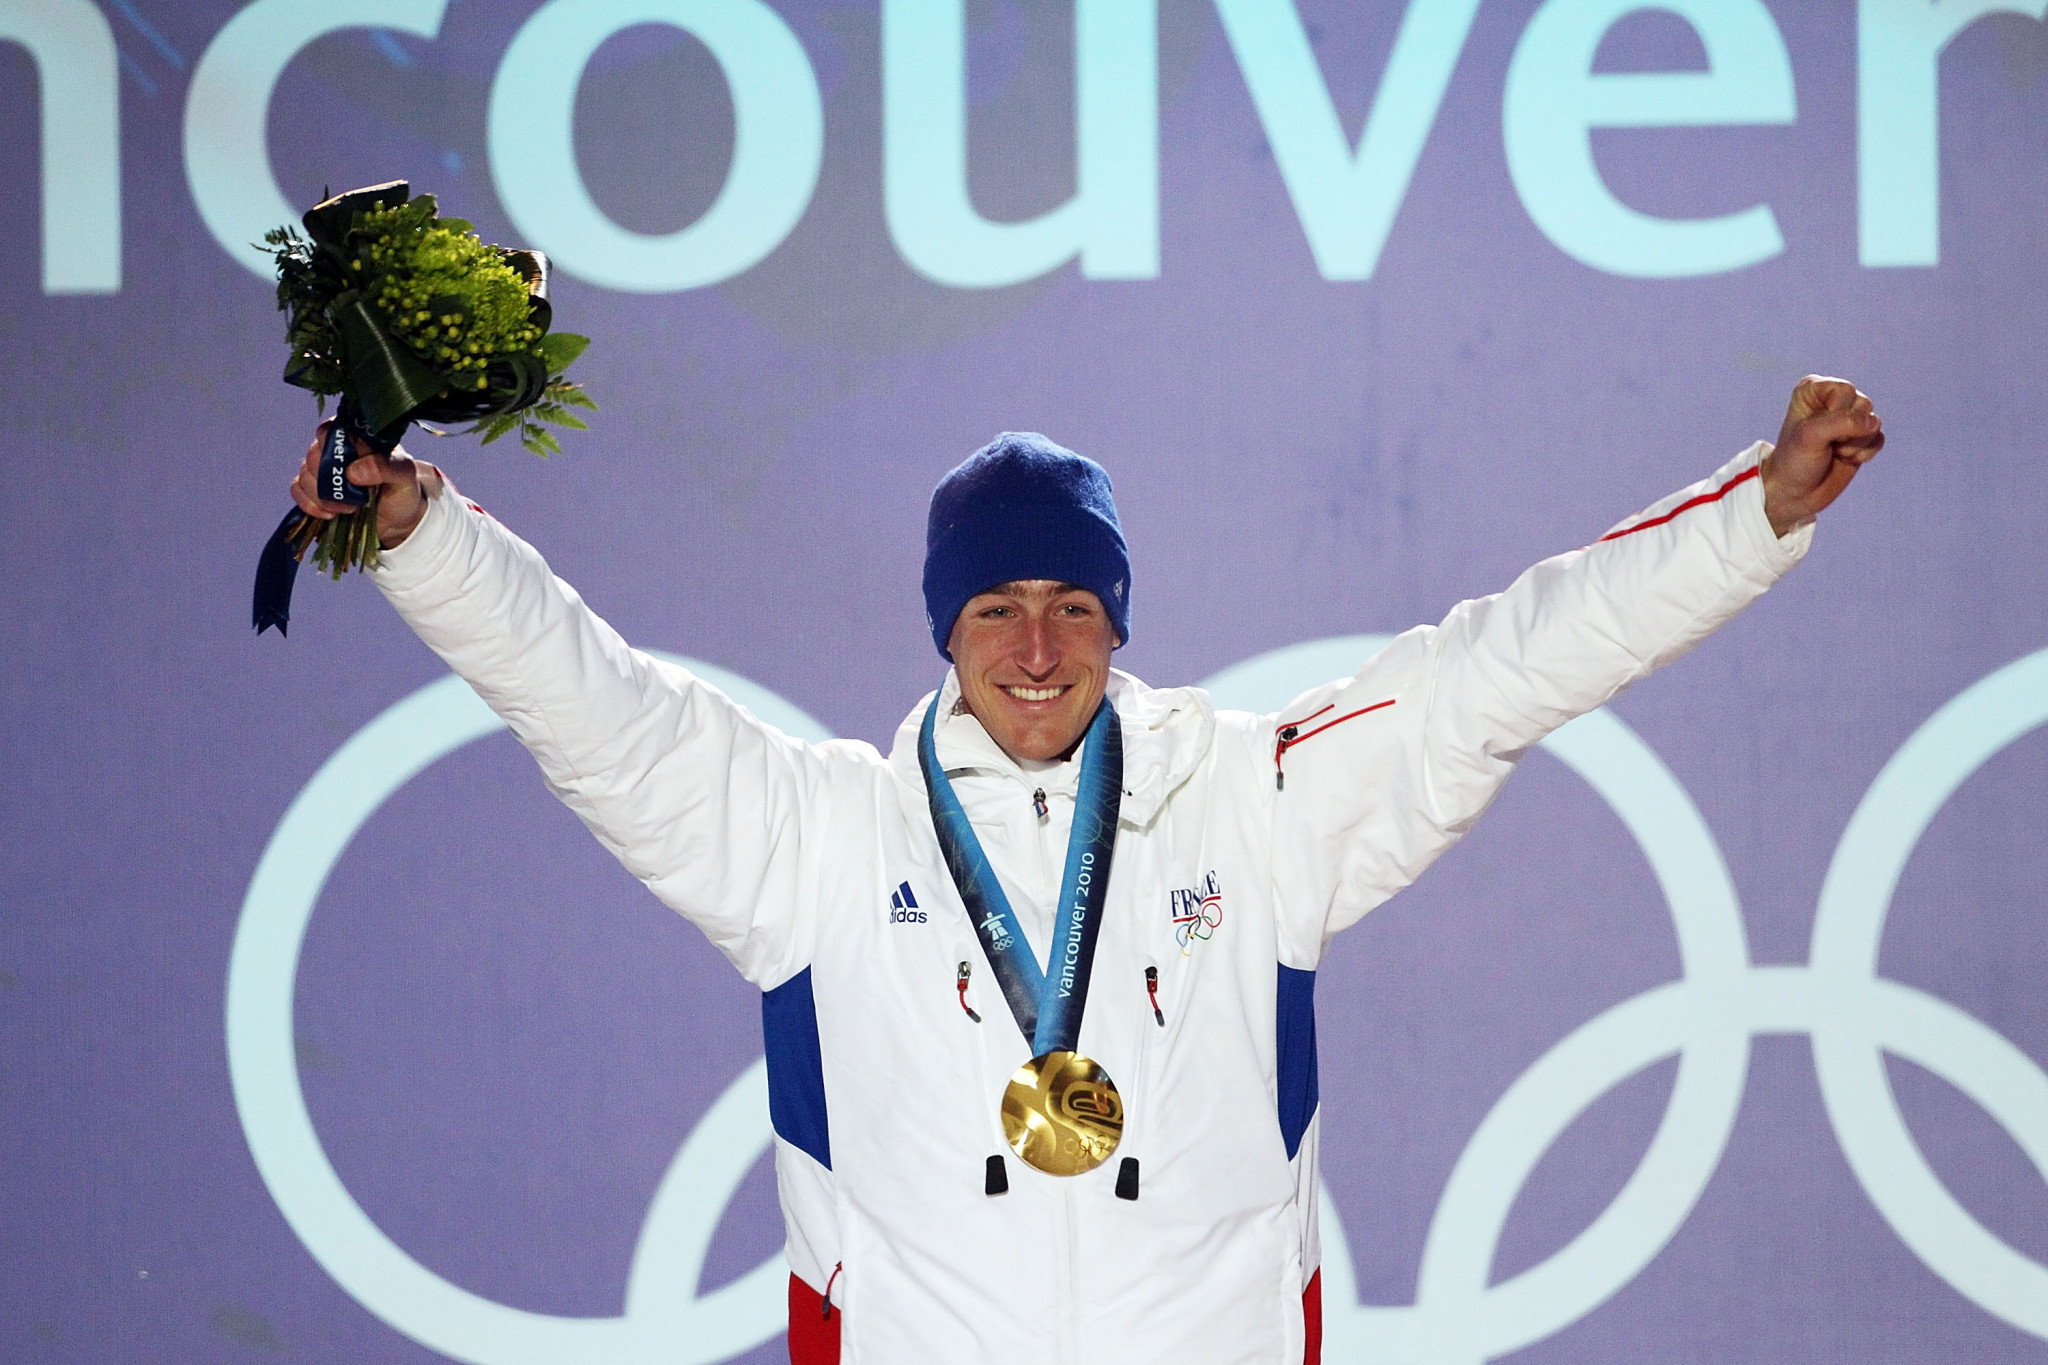 Vincent Jay was a surprise winner of the men's 10km sprint biathlon race at the Vancouver 2010 Winter Olympics ©Getty Images